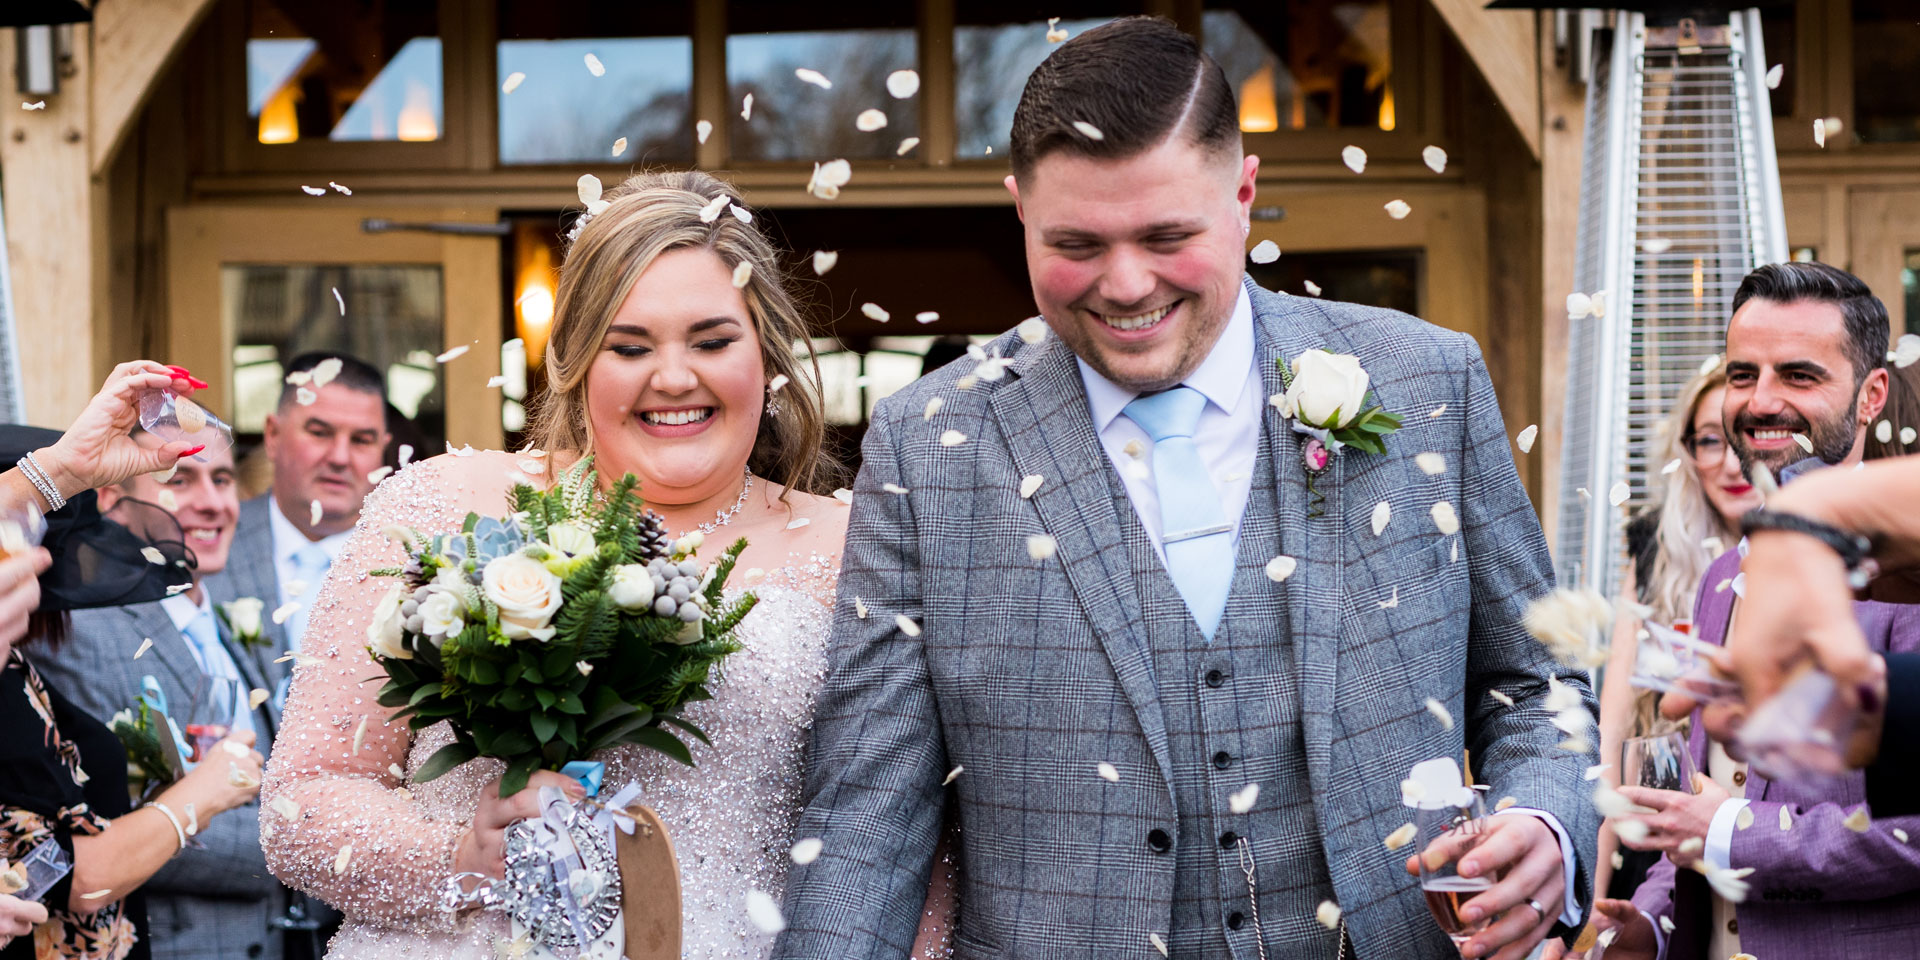 Nathan and Imogen had a beautiful winter wedding